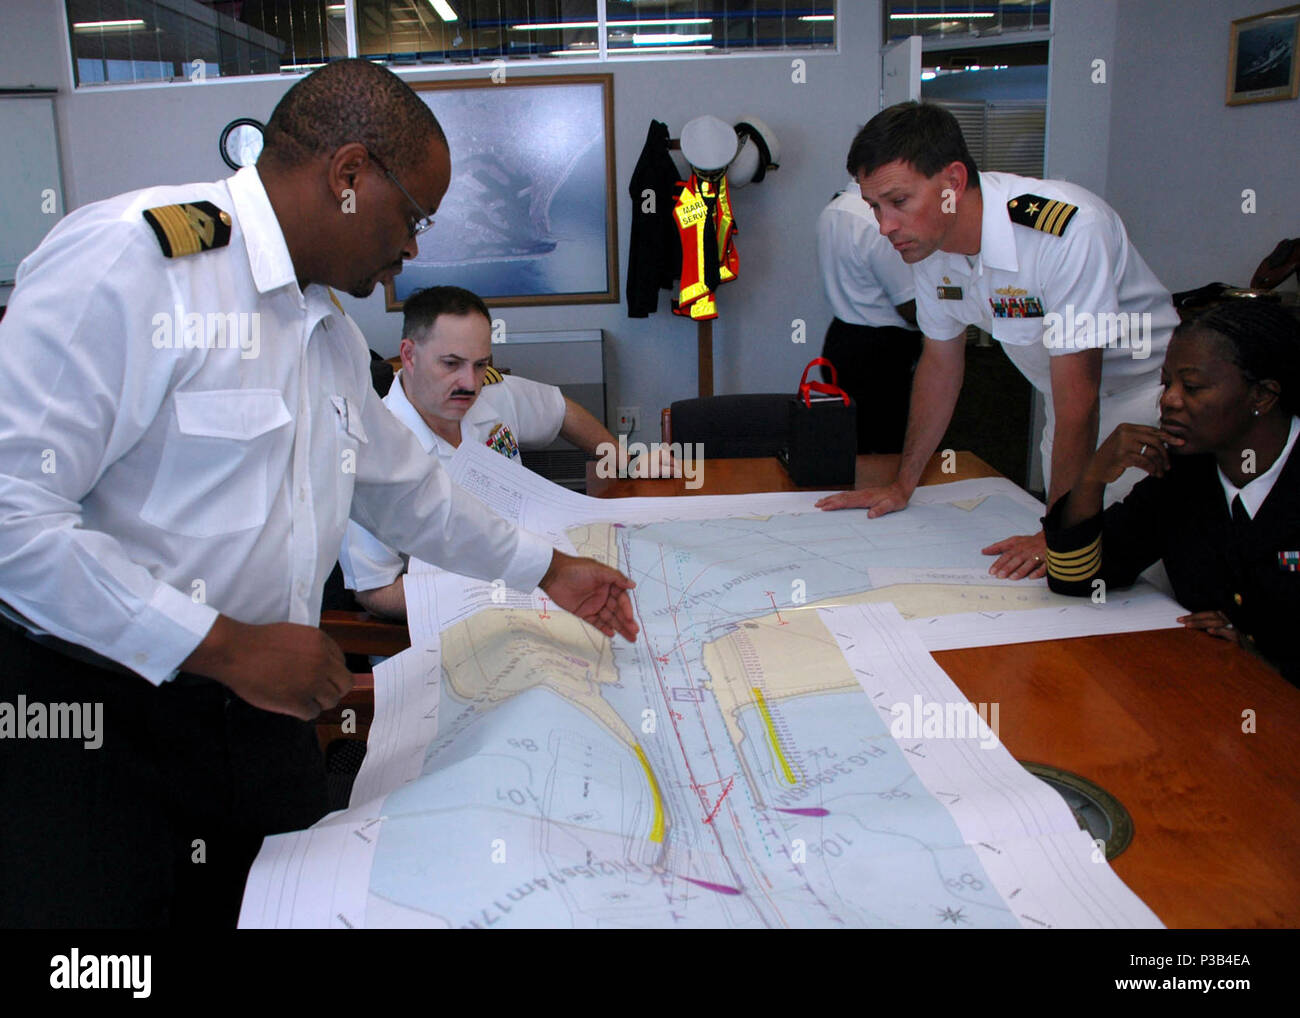 From left, South African Capt. Rufus Lekala, Durban harbor master, discusses the layout of local channels with U.S. Navy Capt. Jim Tranoris, commodore of Commander, Task Force 363, and U.S. Navy Cmdr. Bob Moum, commanding officer of USS Arleigh Burke (DDG 51) in Durban, South Africa, July 13, 2009. Arleigh Burke is in Durban to start a series of cooperative evolutions with the South African navy as part of a scheduled military-to-military engagement. (DoD Stock Photo